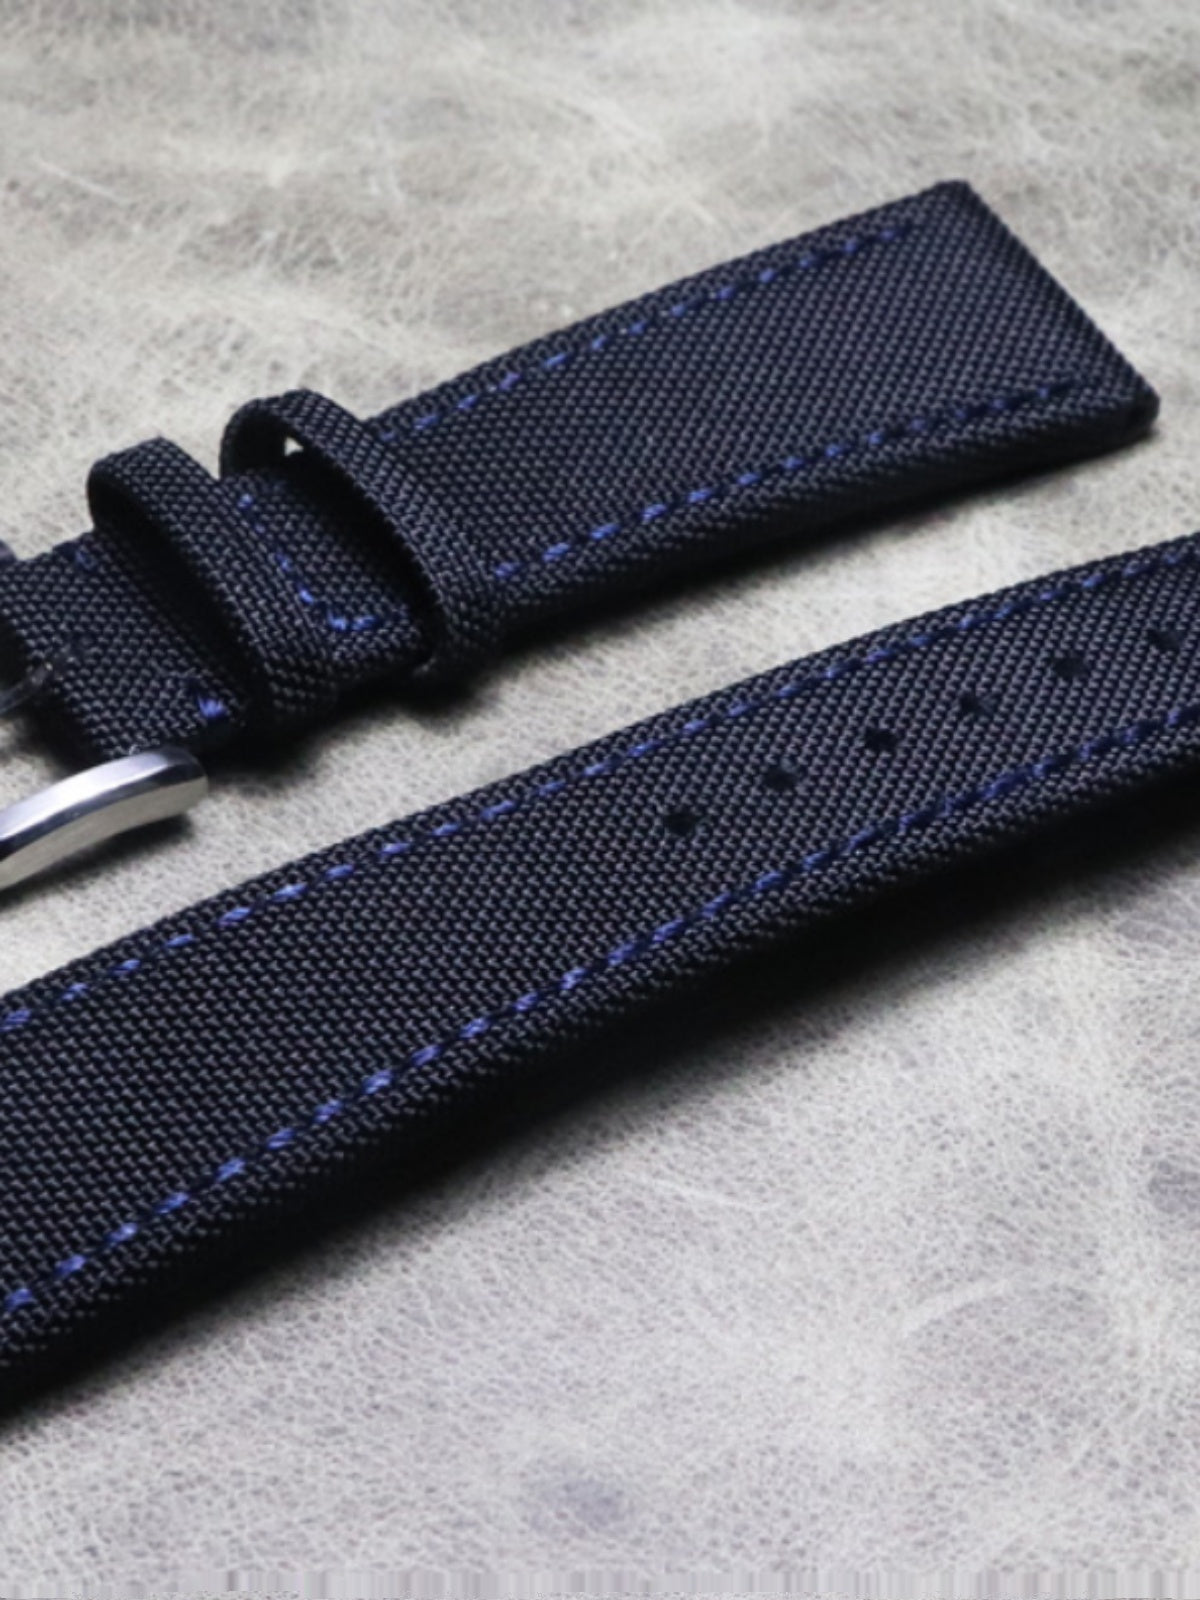 Blue and Blue Stitches 20mm 22mm Composite Fiber Watch Strap Genuine Leather Strap Sports Watch Outdoor Mountaineering Watch High Quality